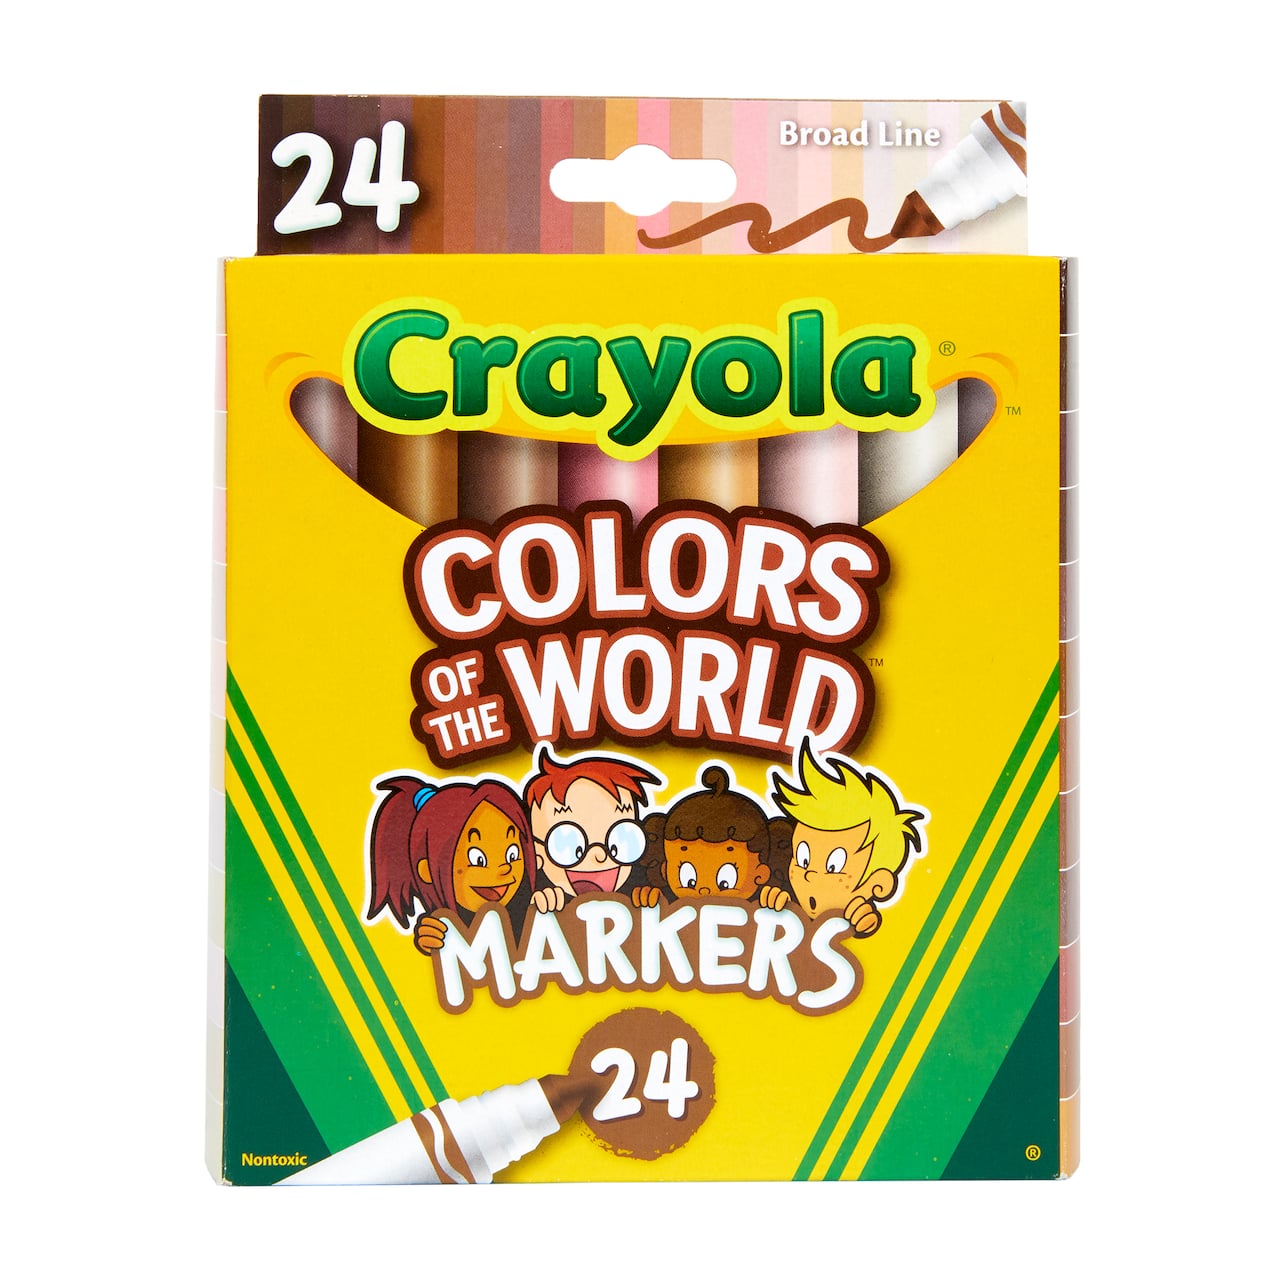 Crayola&#xAE; Colors of the World Broad Line Markers, 24ct.